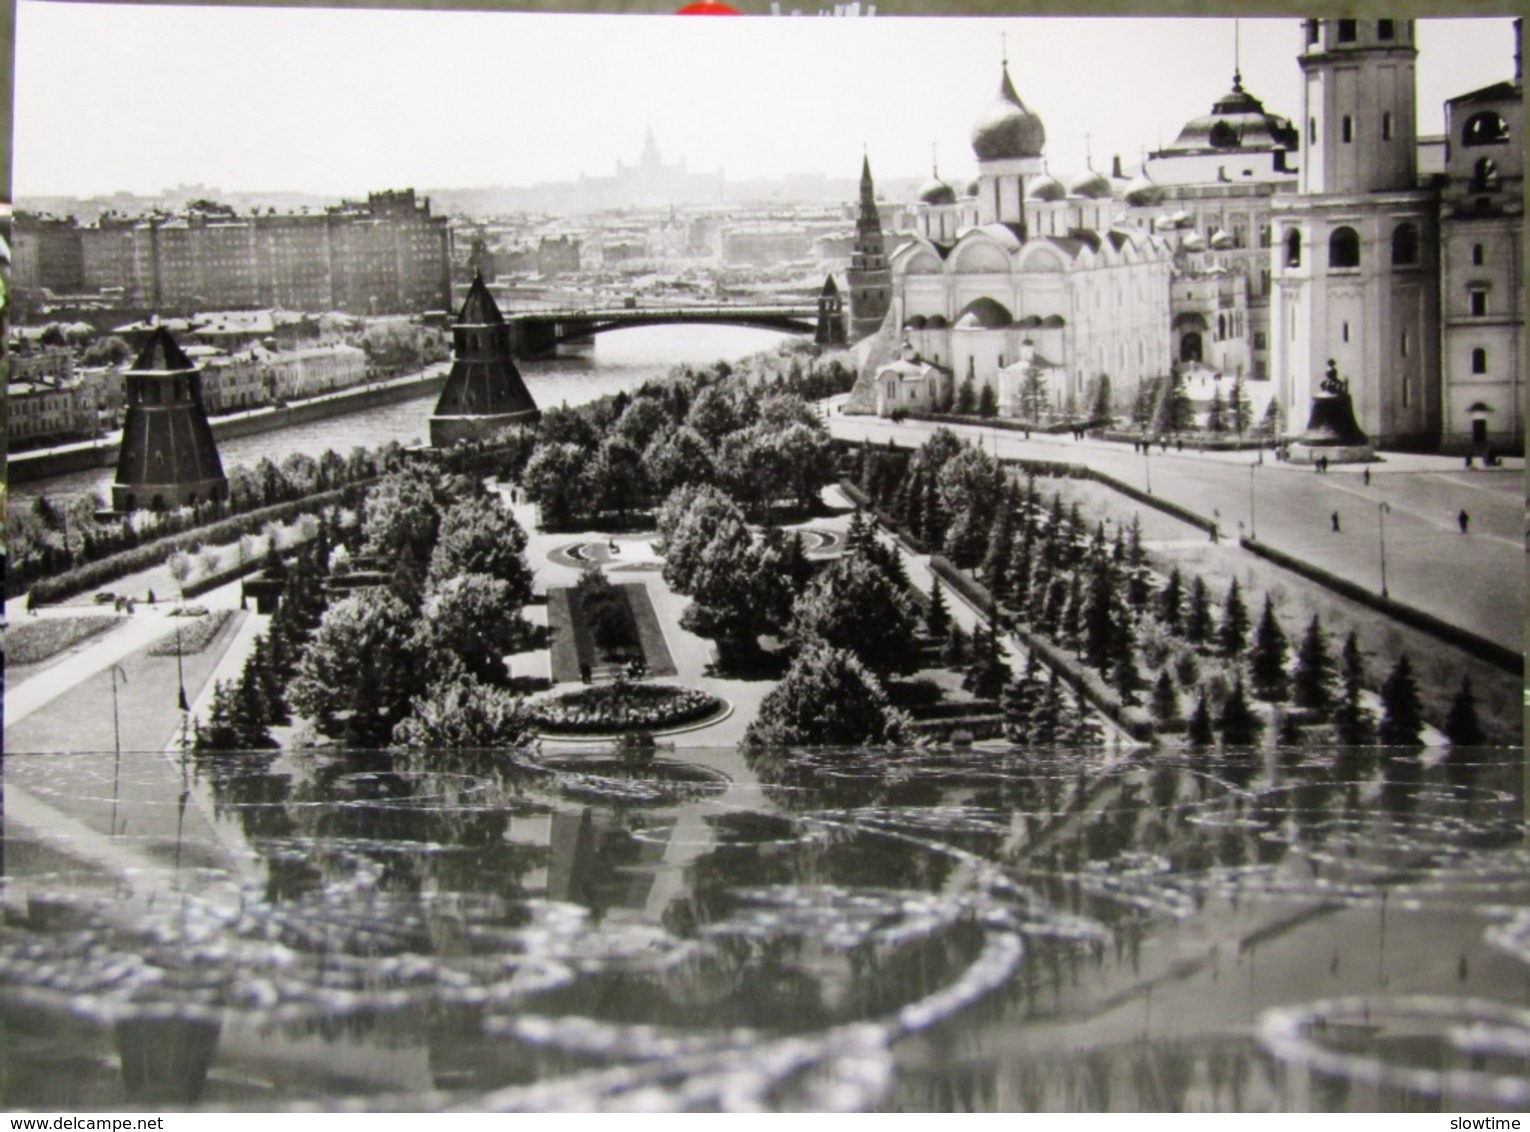 Moscow Kremlin Spasskaya Tower, the faceted chamber, the Tsar cannon, the Lenin mausoleum 10 postcards of the USSR 1971